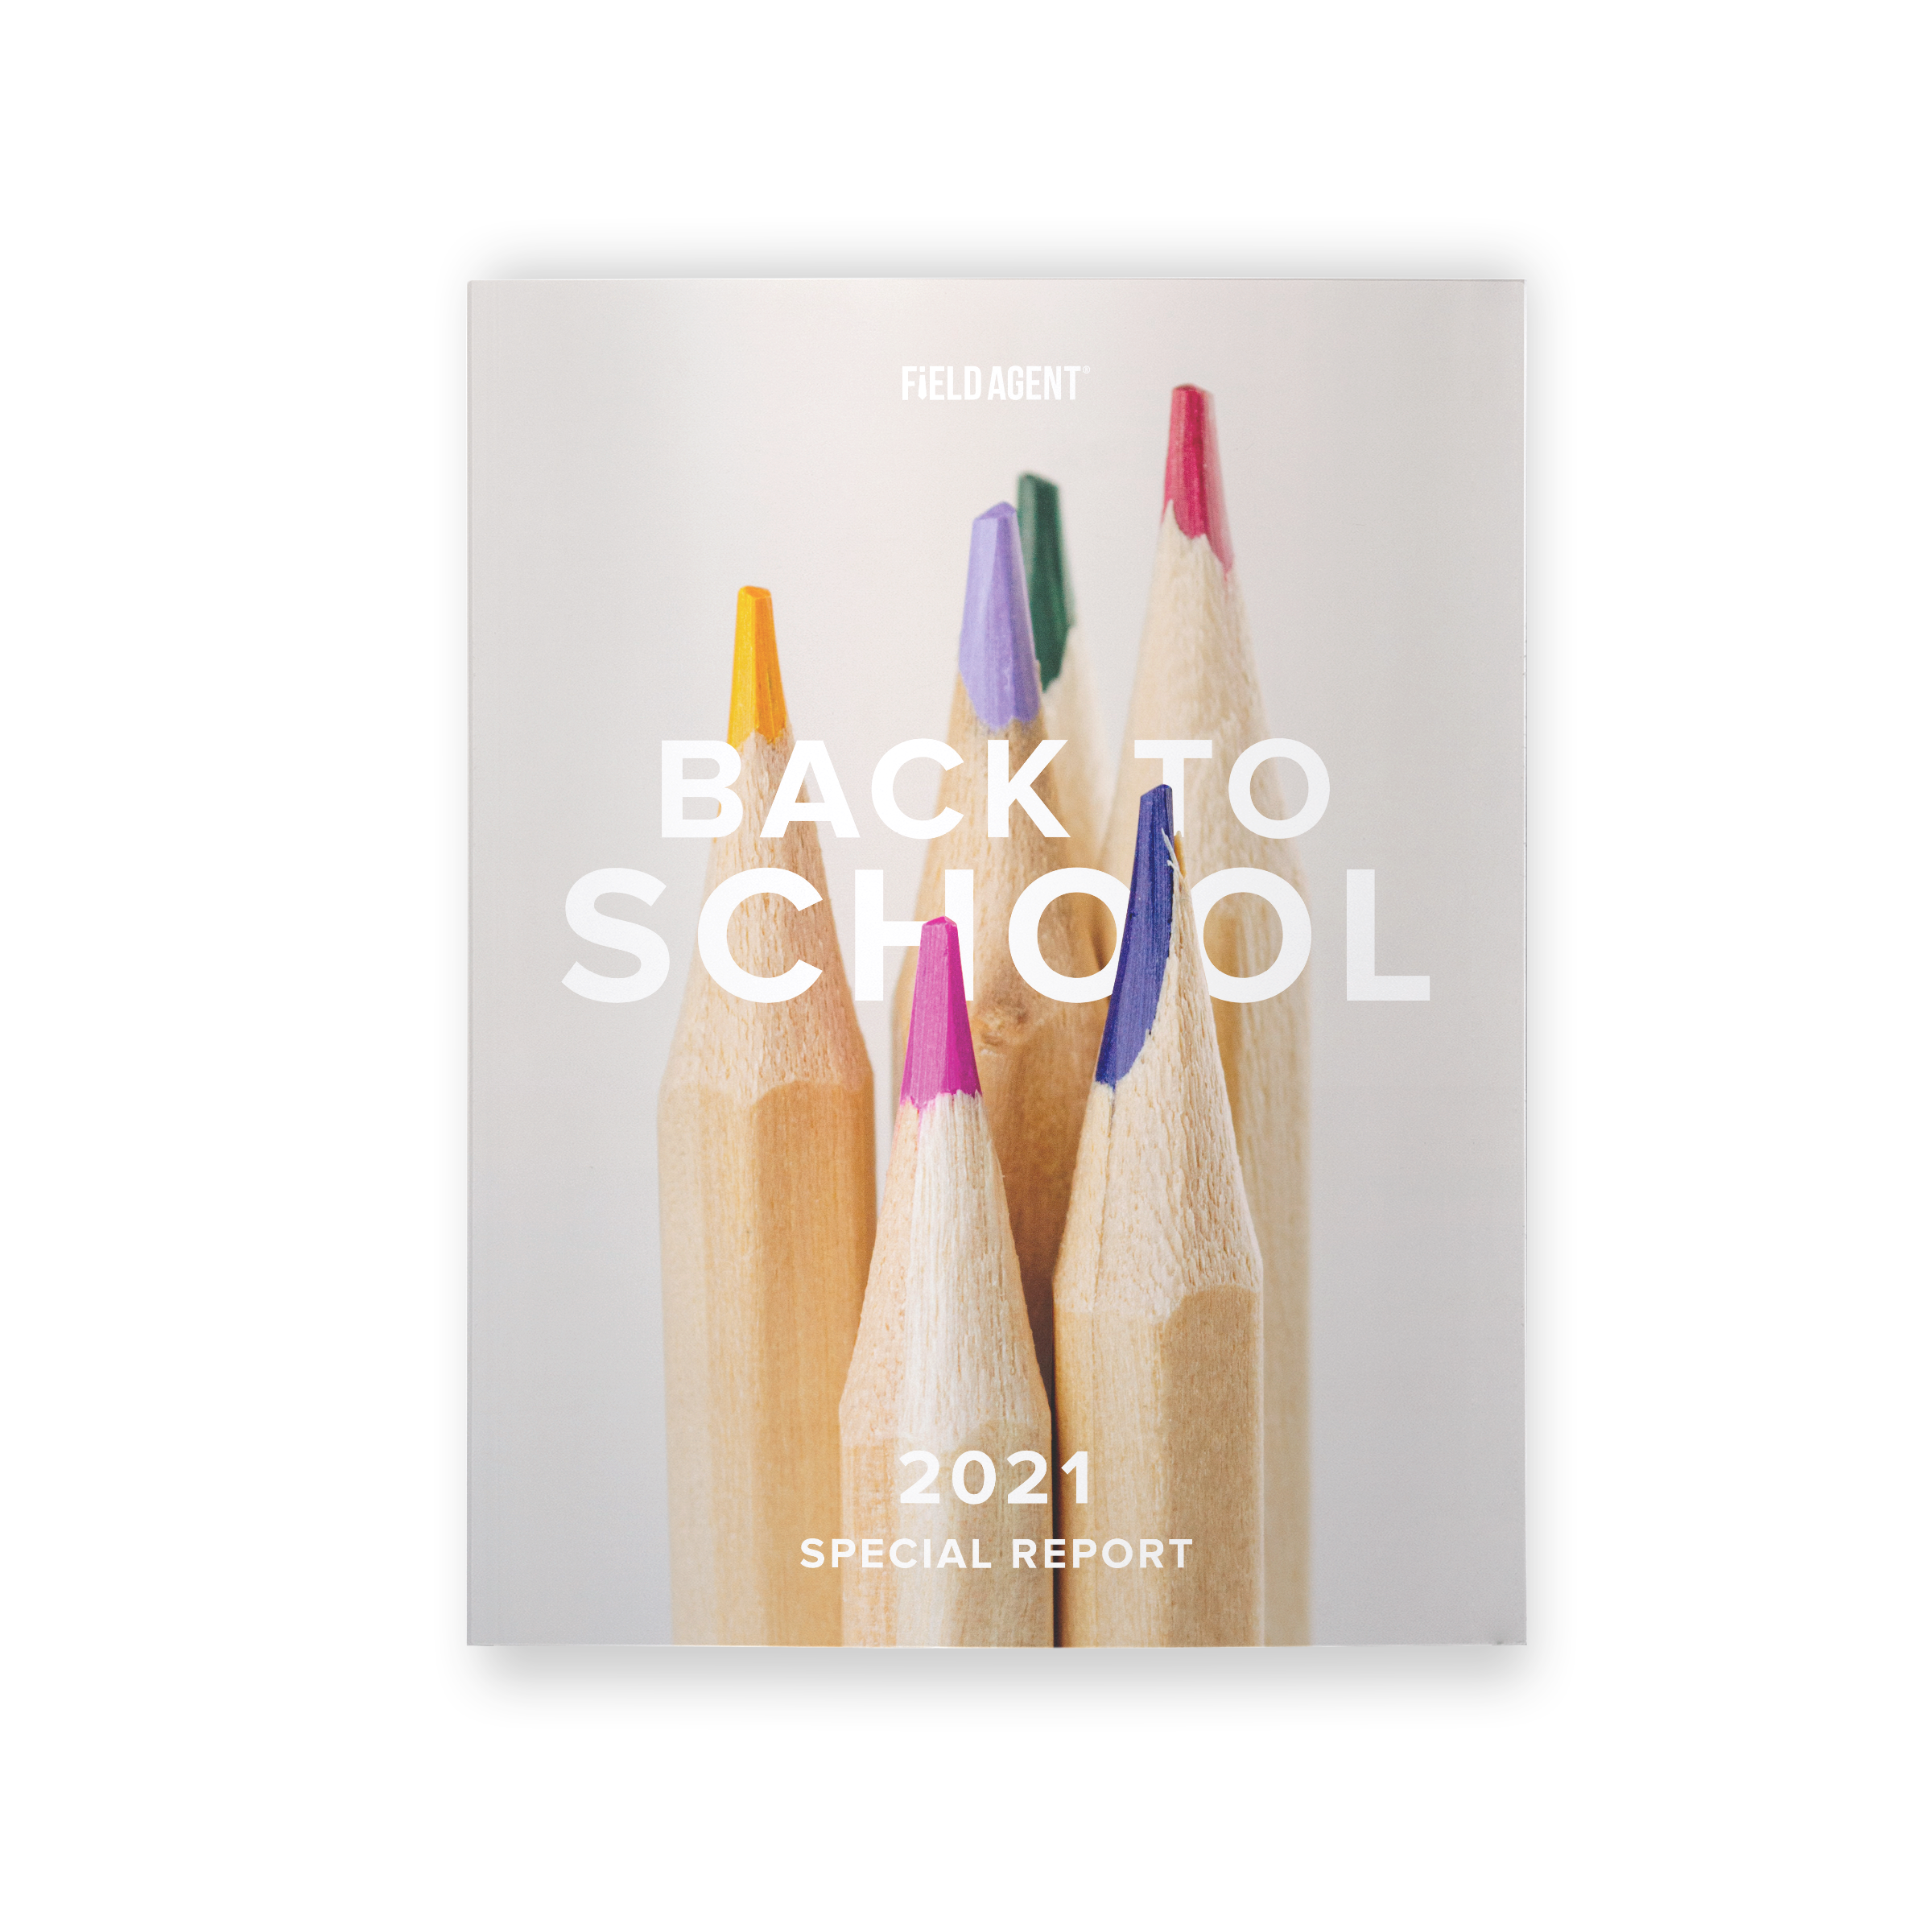 Field Agent Back to School 2021 Special Report Free Download